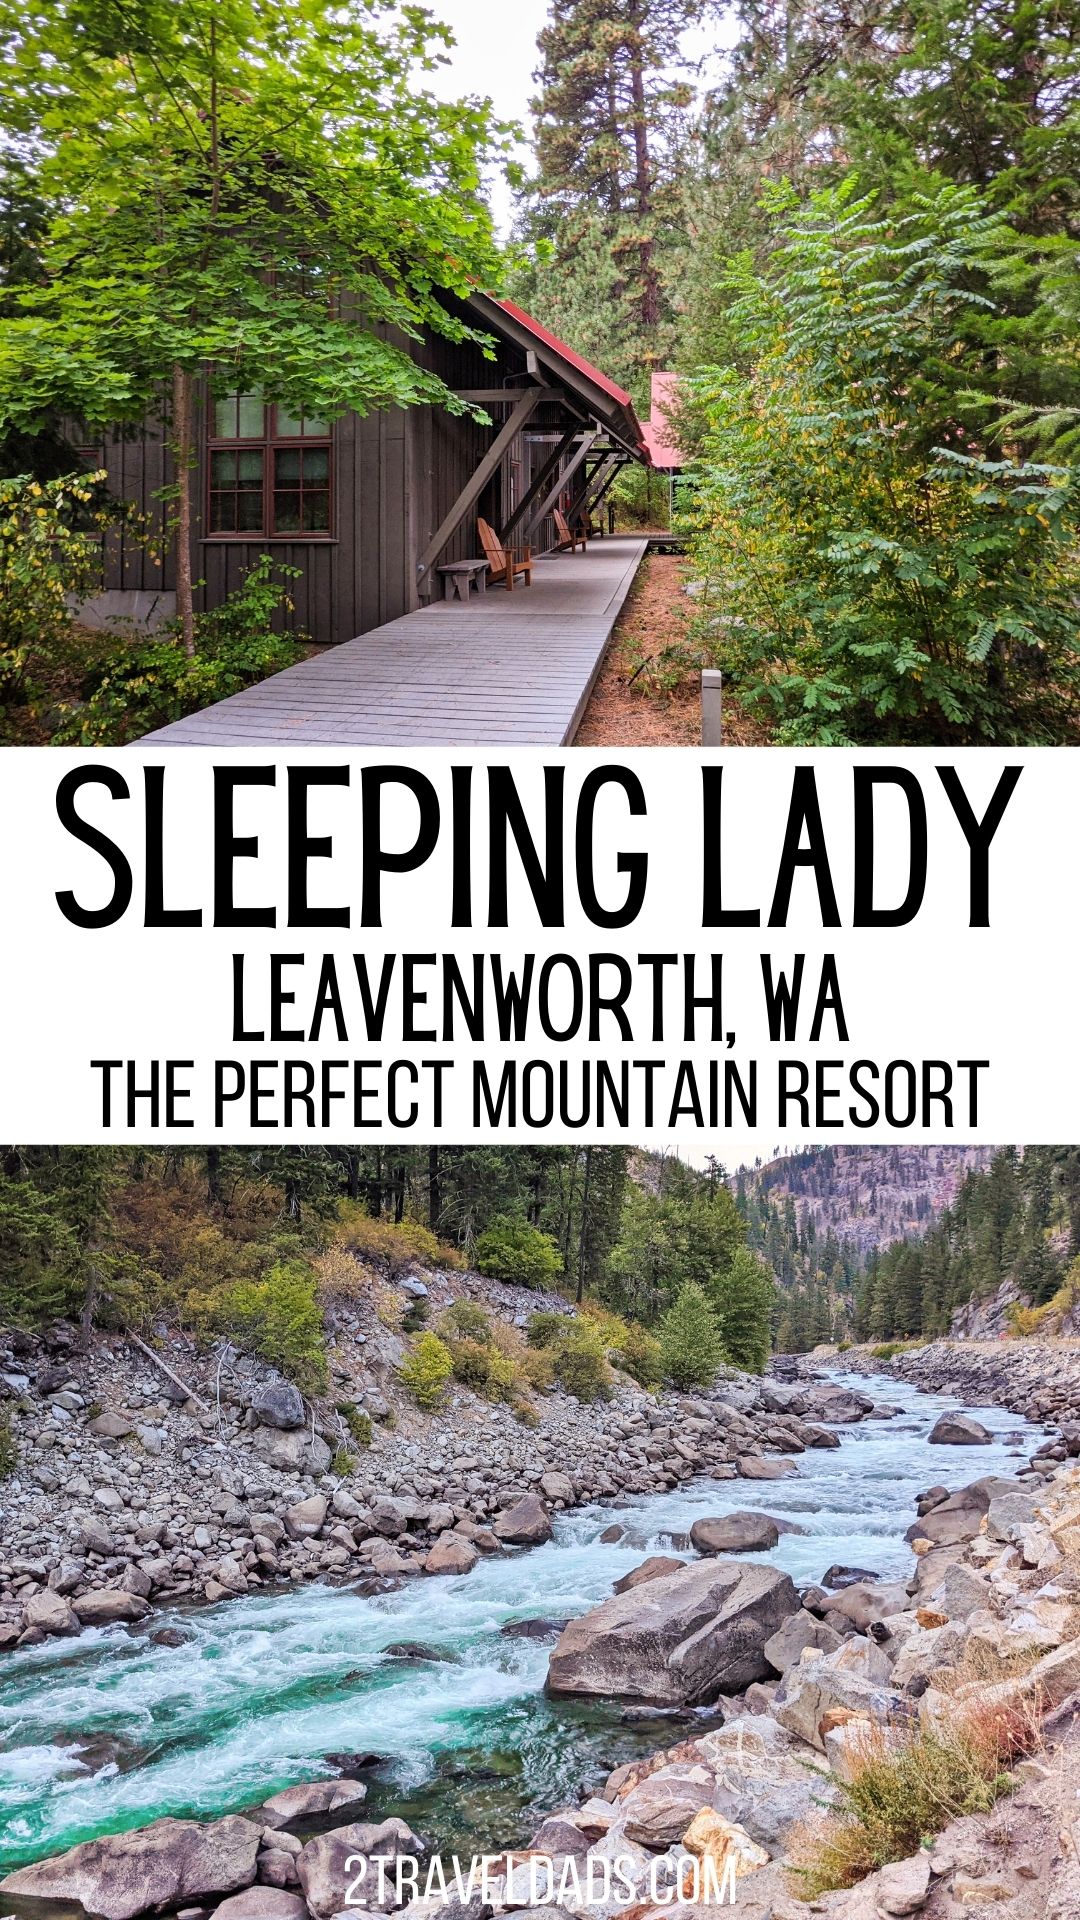 Leavenworth's Sleeping Lady Mountain Resort is the perfect getaway from Seattle. Review and details for staying at the Sleeping Lady, including things to do and best nearby sights.